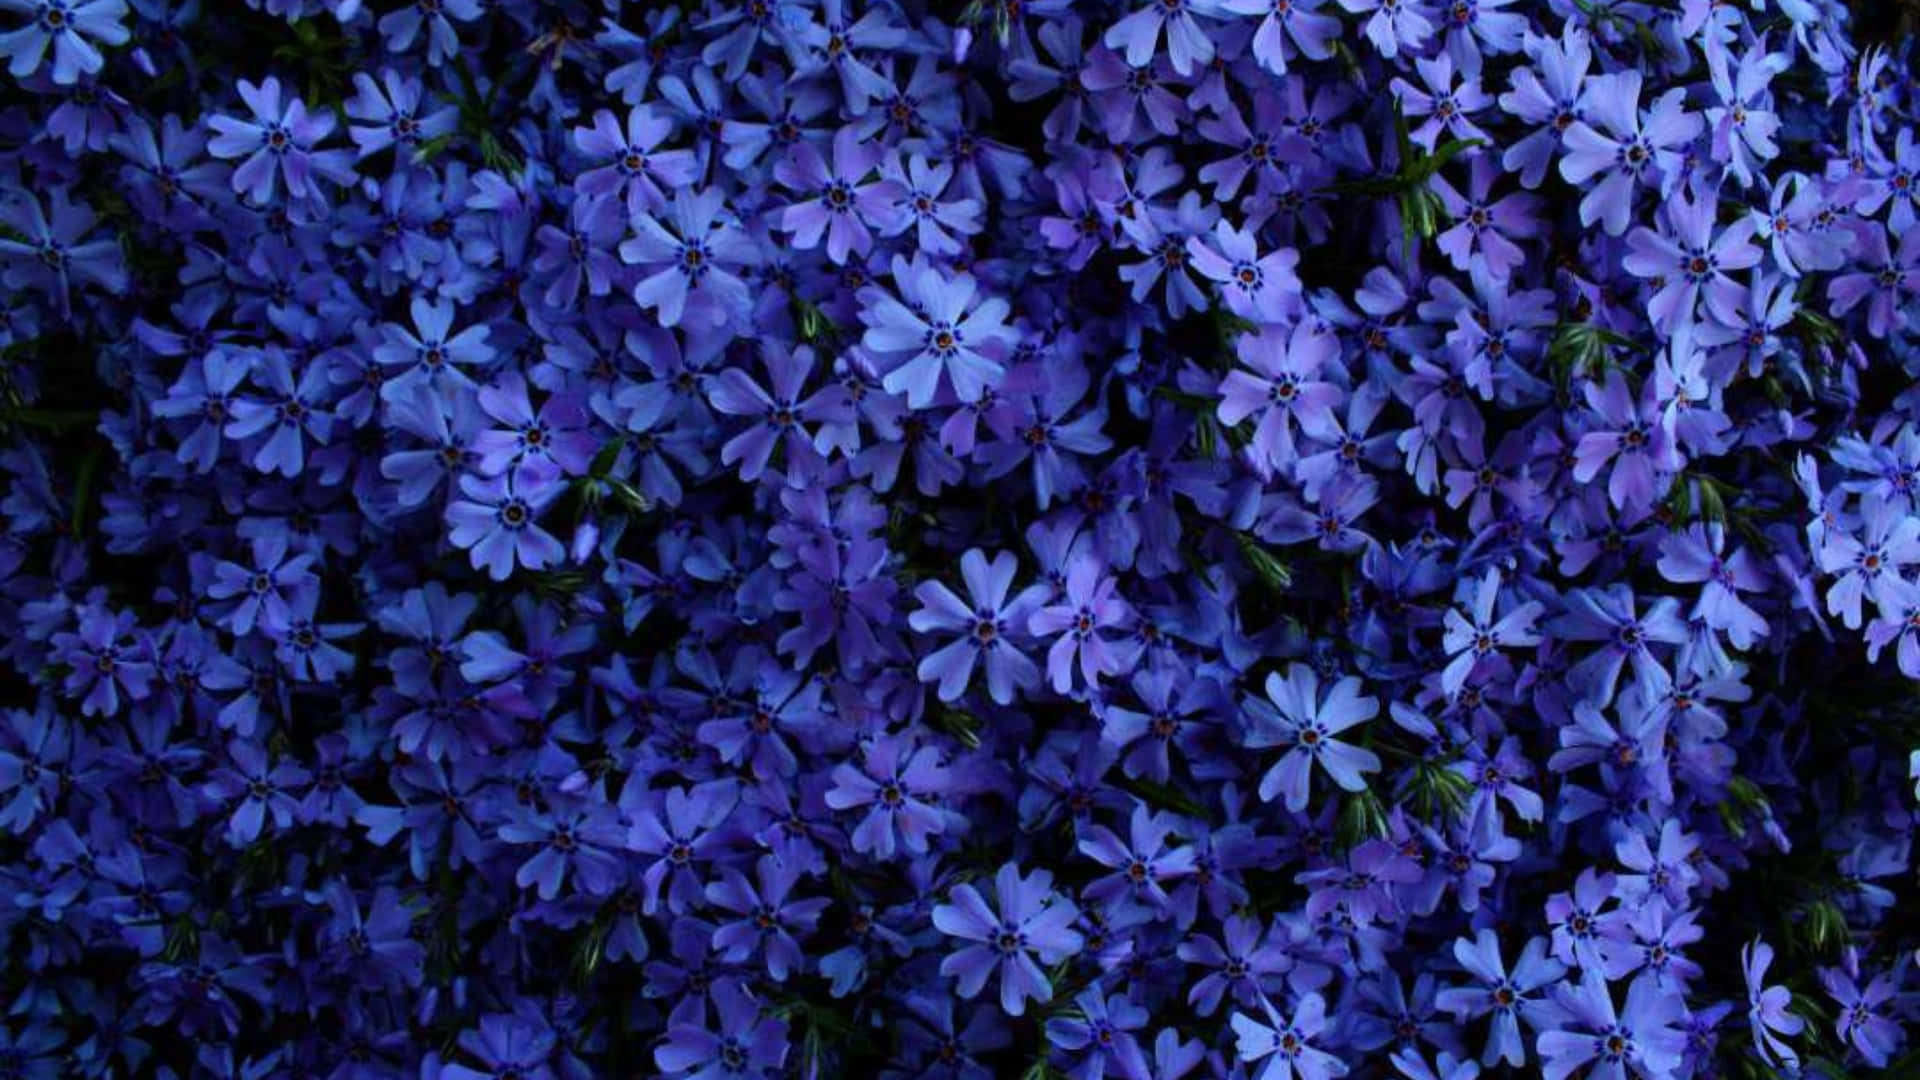 A Blue Flower Wall With Many Flowers